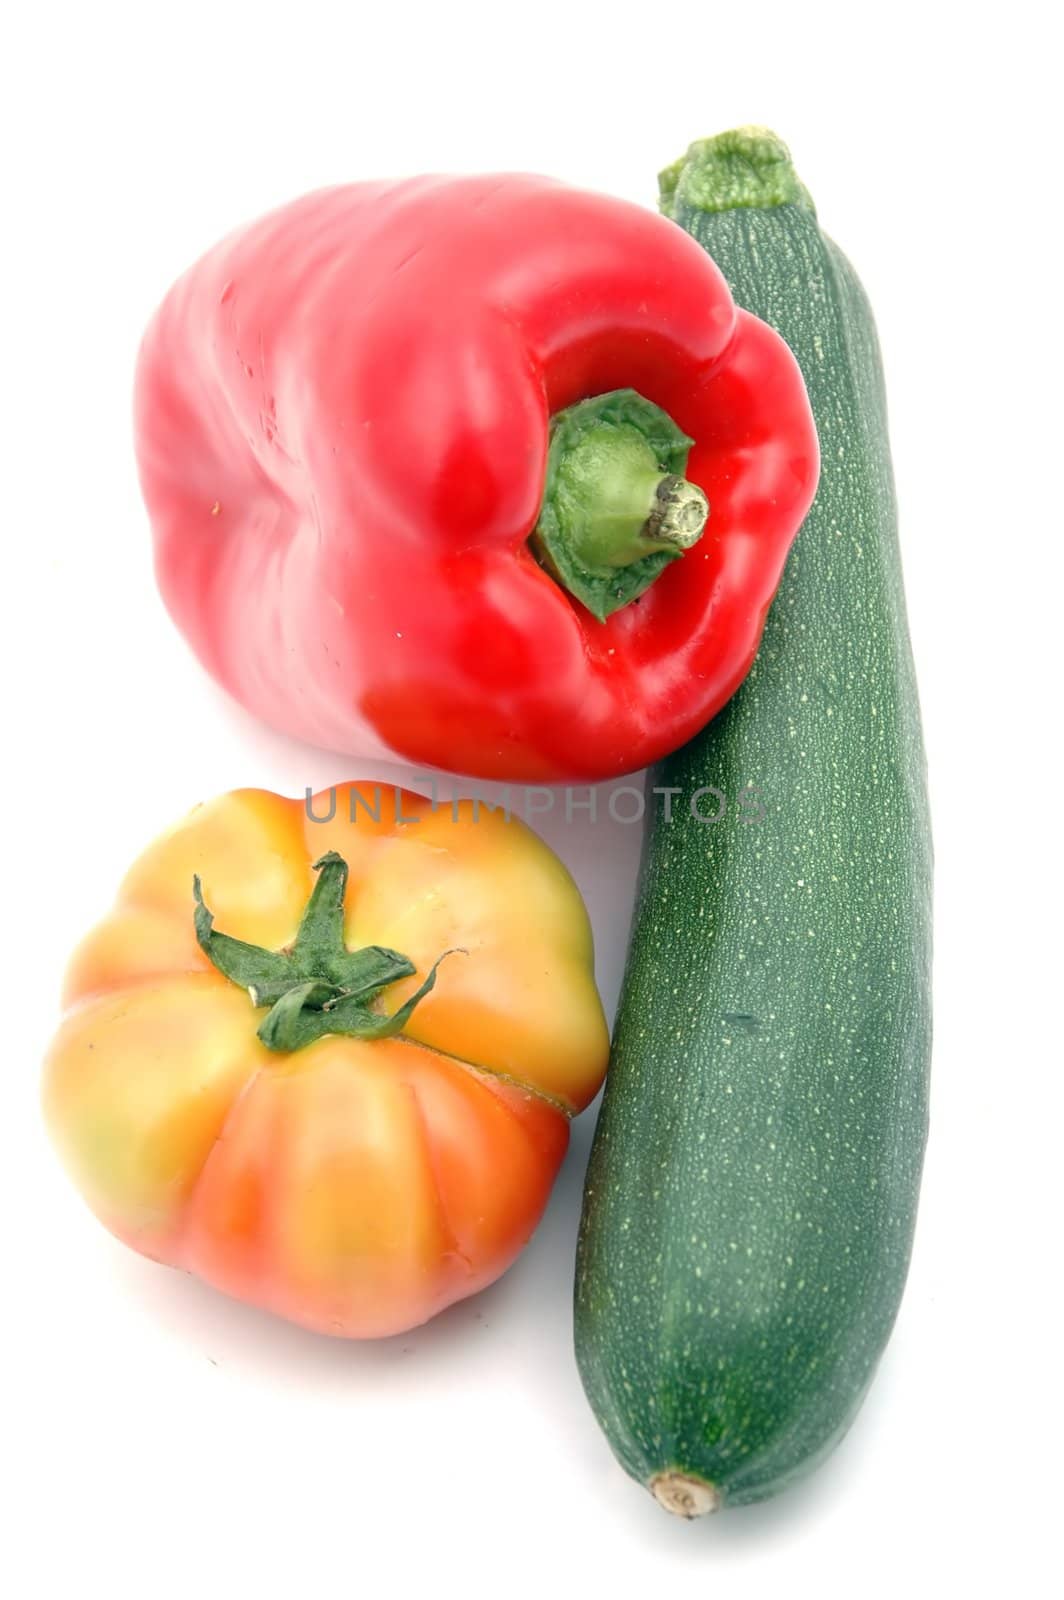 red pepper, tomato and courgette